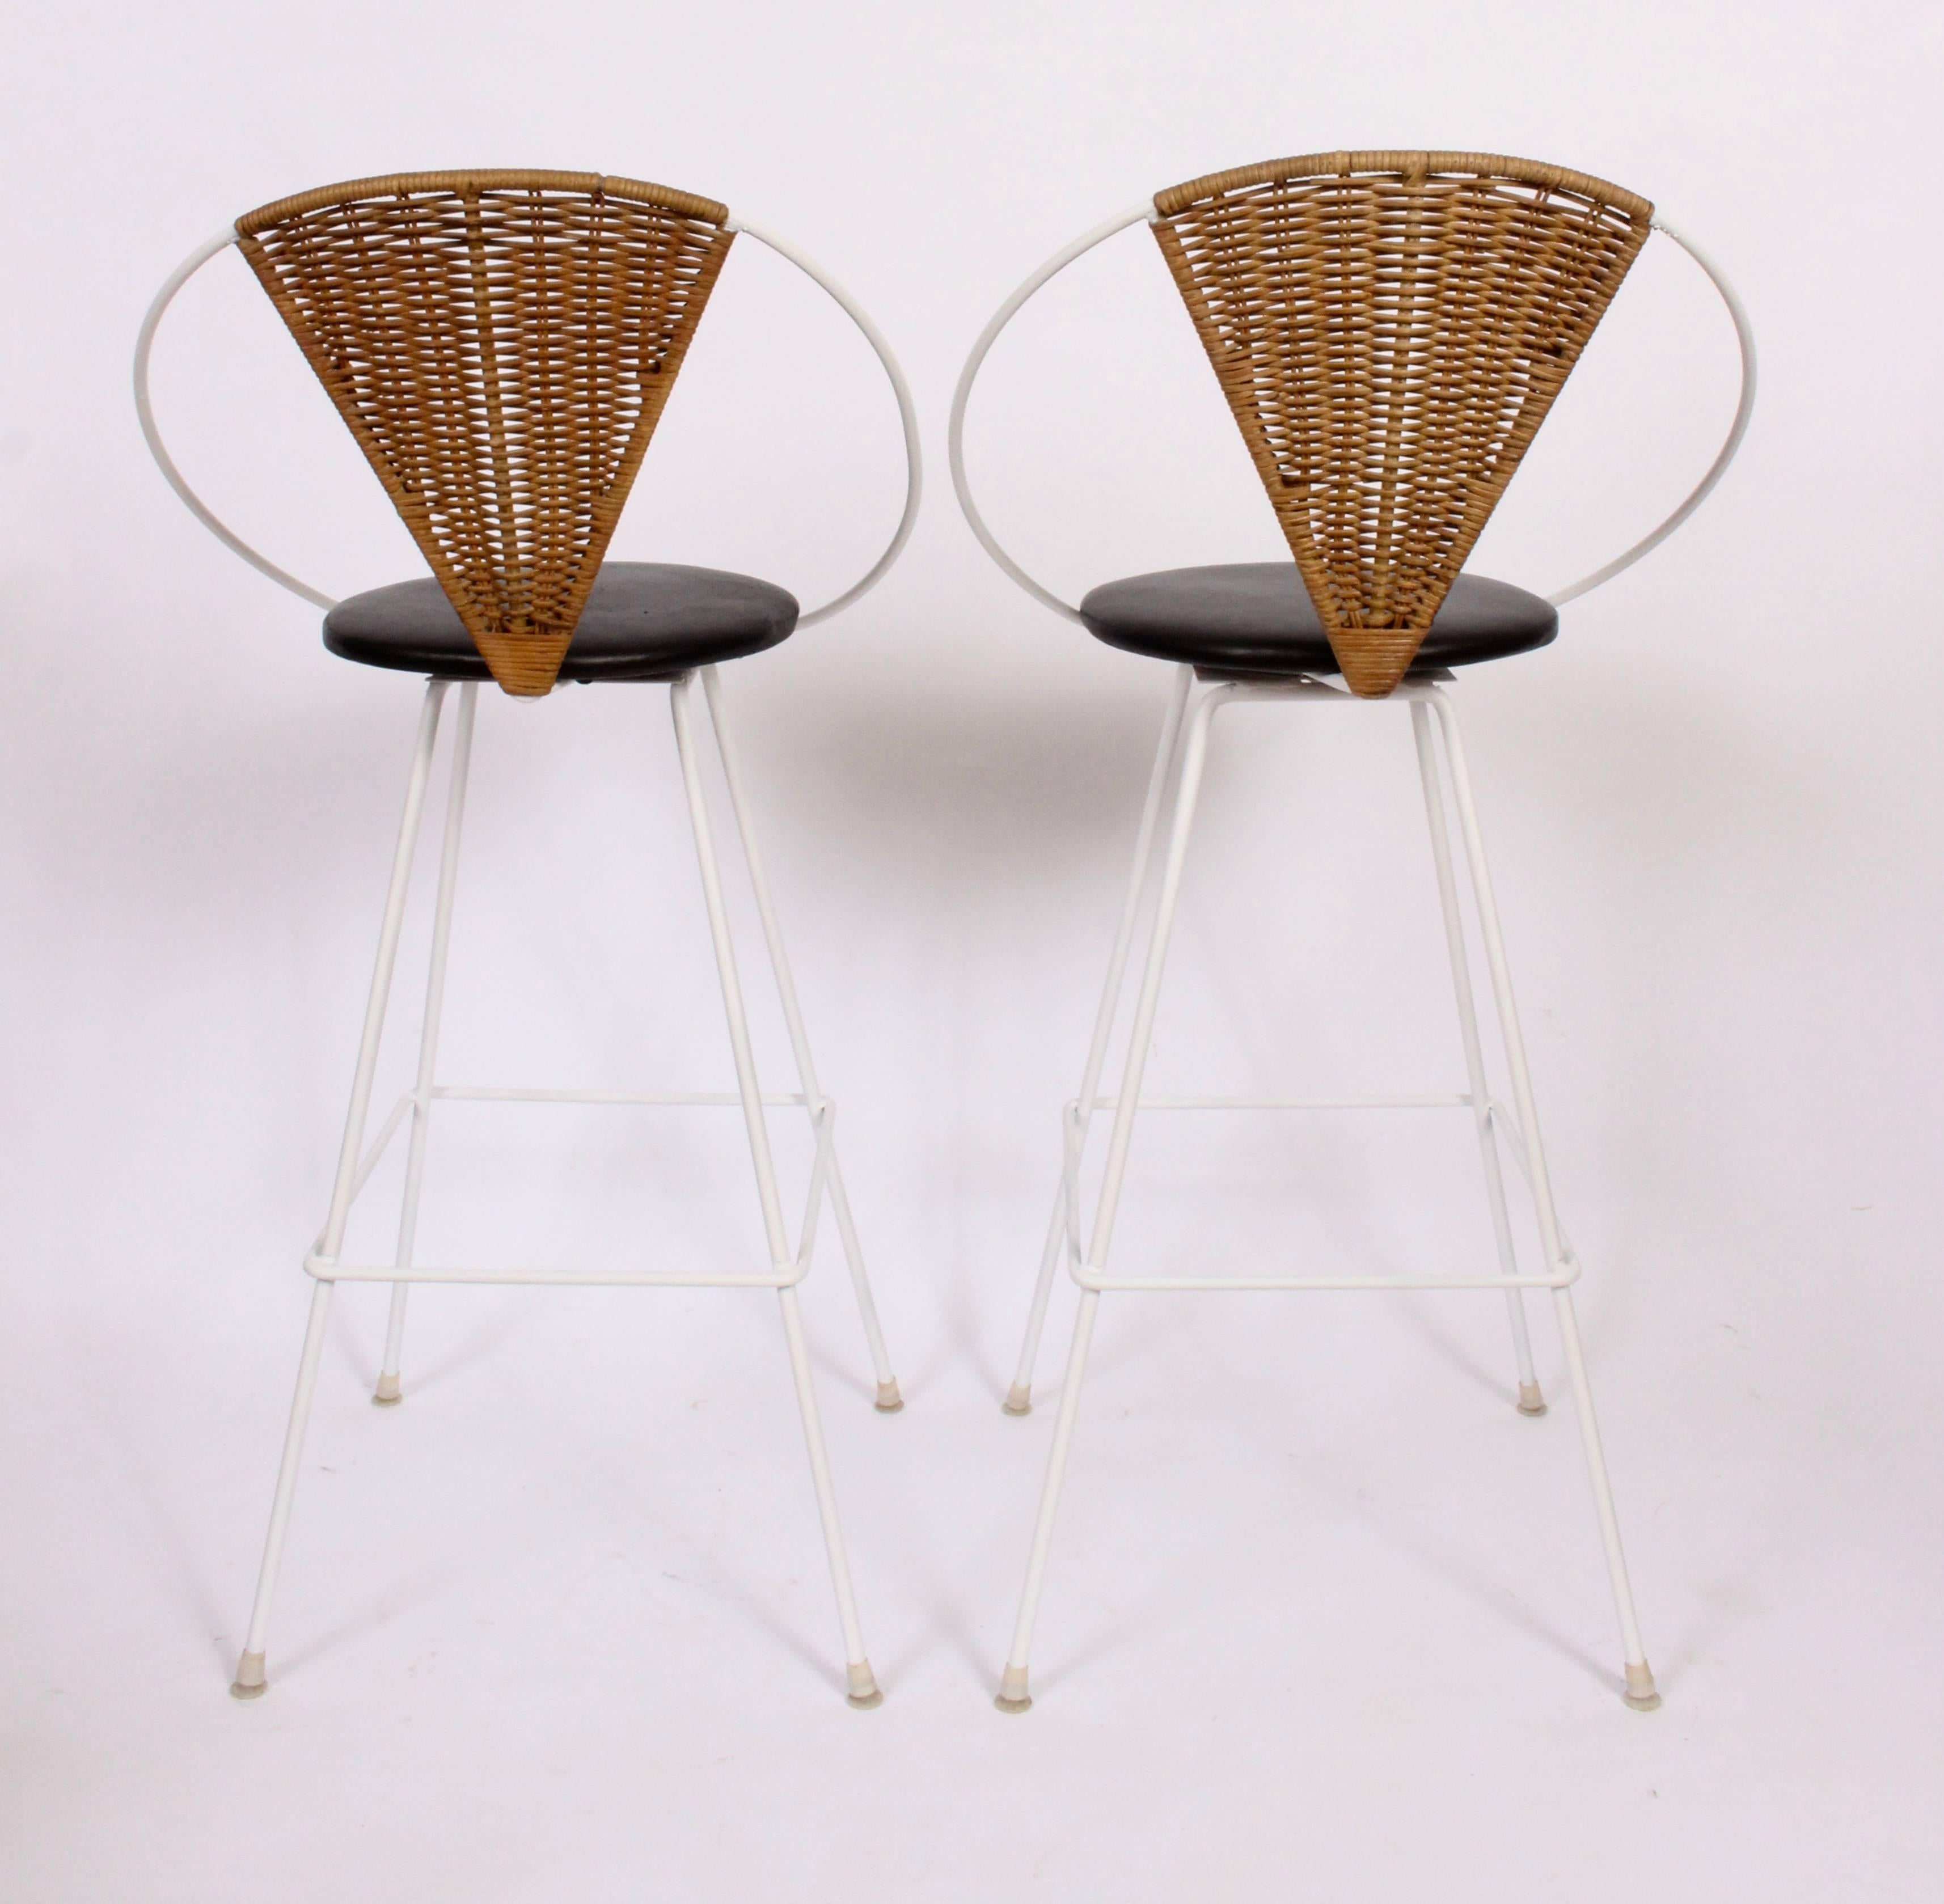 Rare pair of Arthur Umanoff for Shaver Howard Wrought Iron, Rattan Back and Leather Seat Bar Stools. Featuring a White satin enameled wrought iron framework, footrests, hoop back, triangular rattan backrests and newly upholstered round Black leather